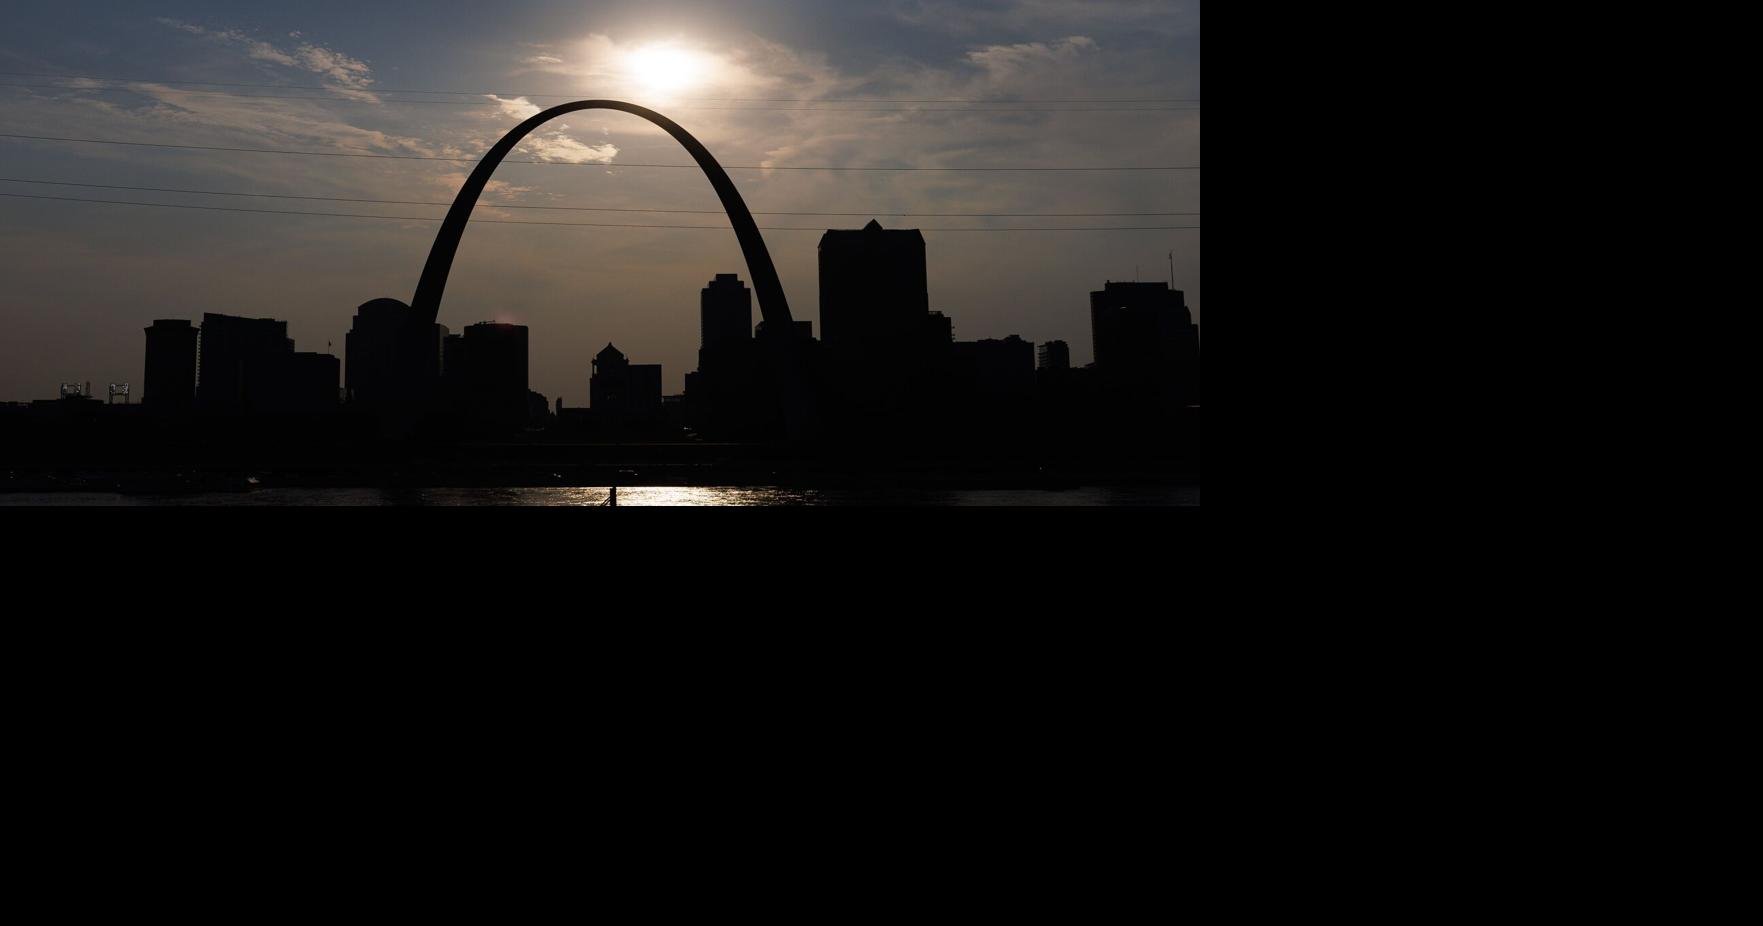 Gateway Arches to be lit red, white & blue in honor of Memorial Day